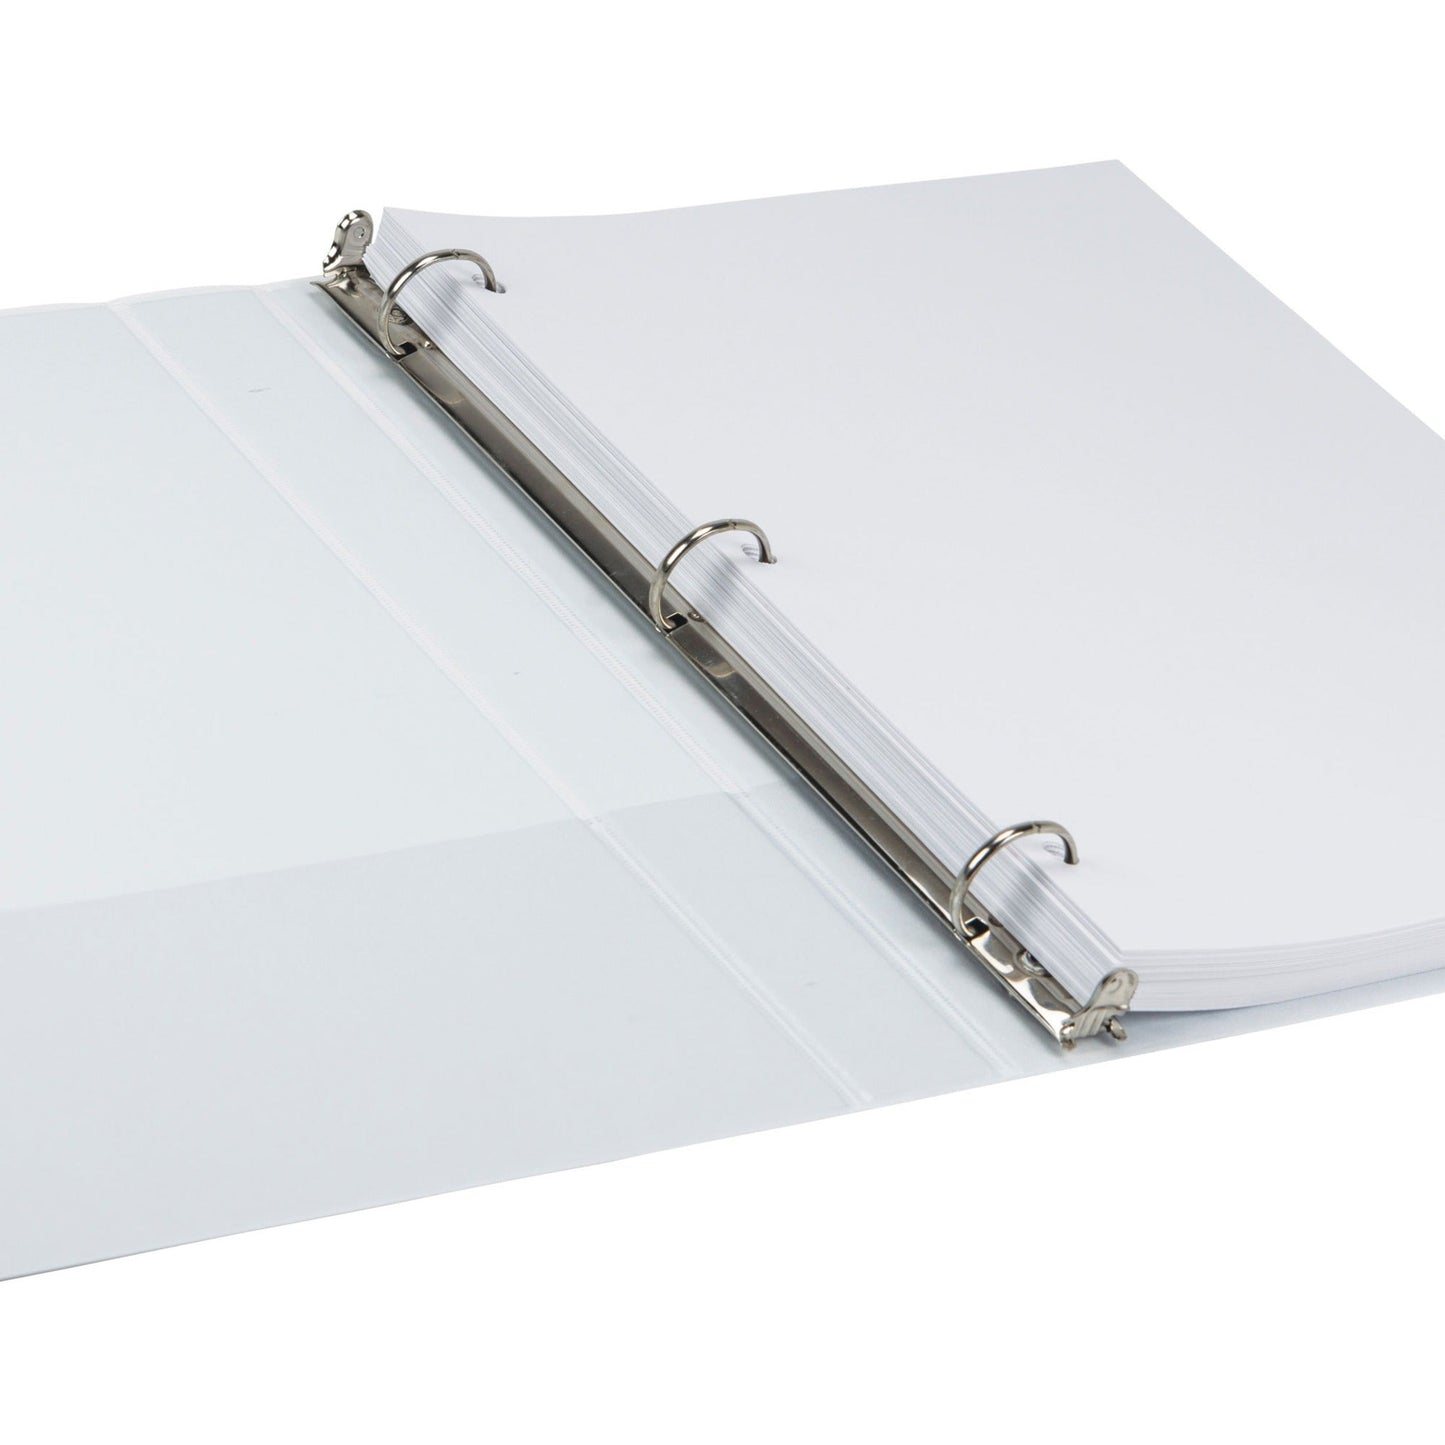 Samsill Earth's Choice Plant-Based 0.5 Inch View Binder - 3 Ring Binder - Round Ring - White - 6 Pack